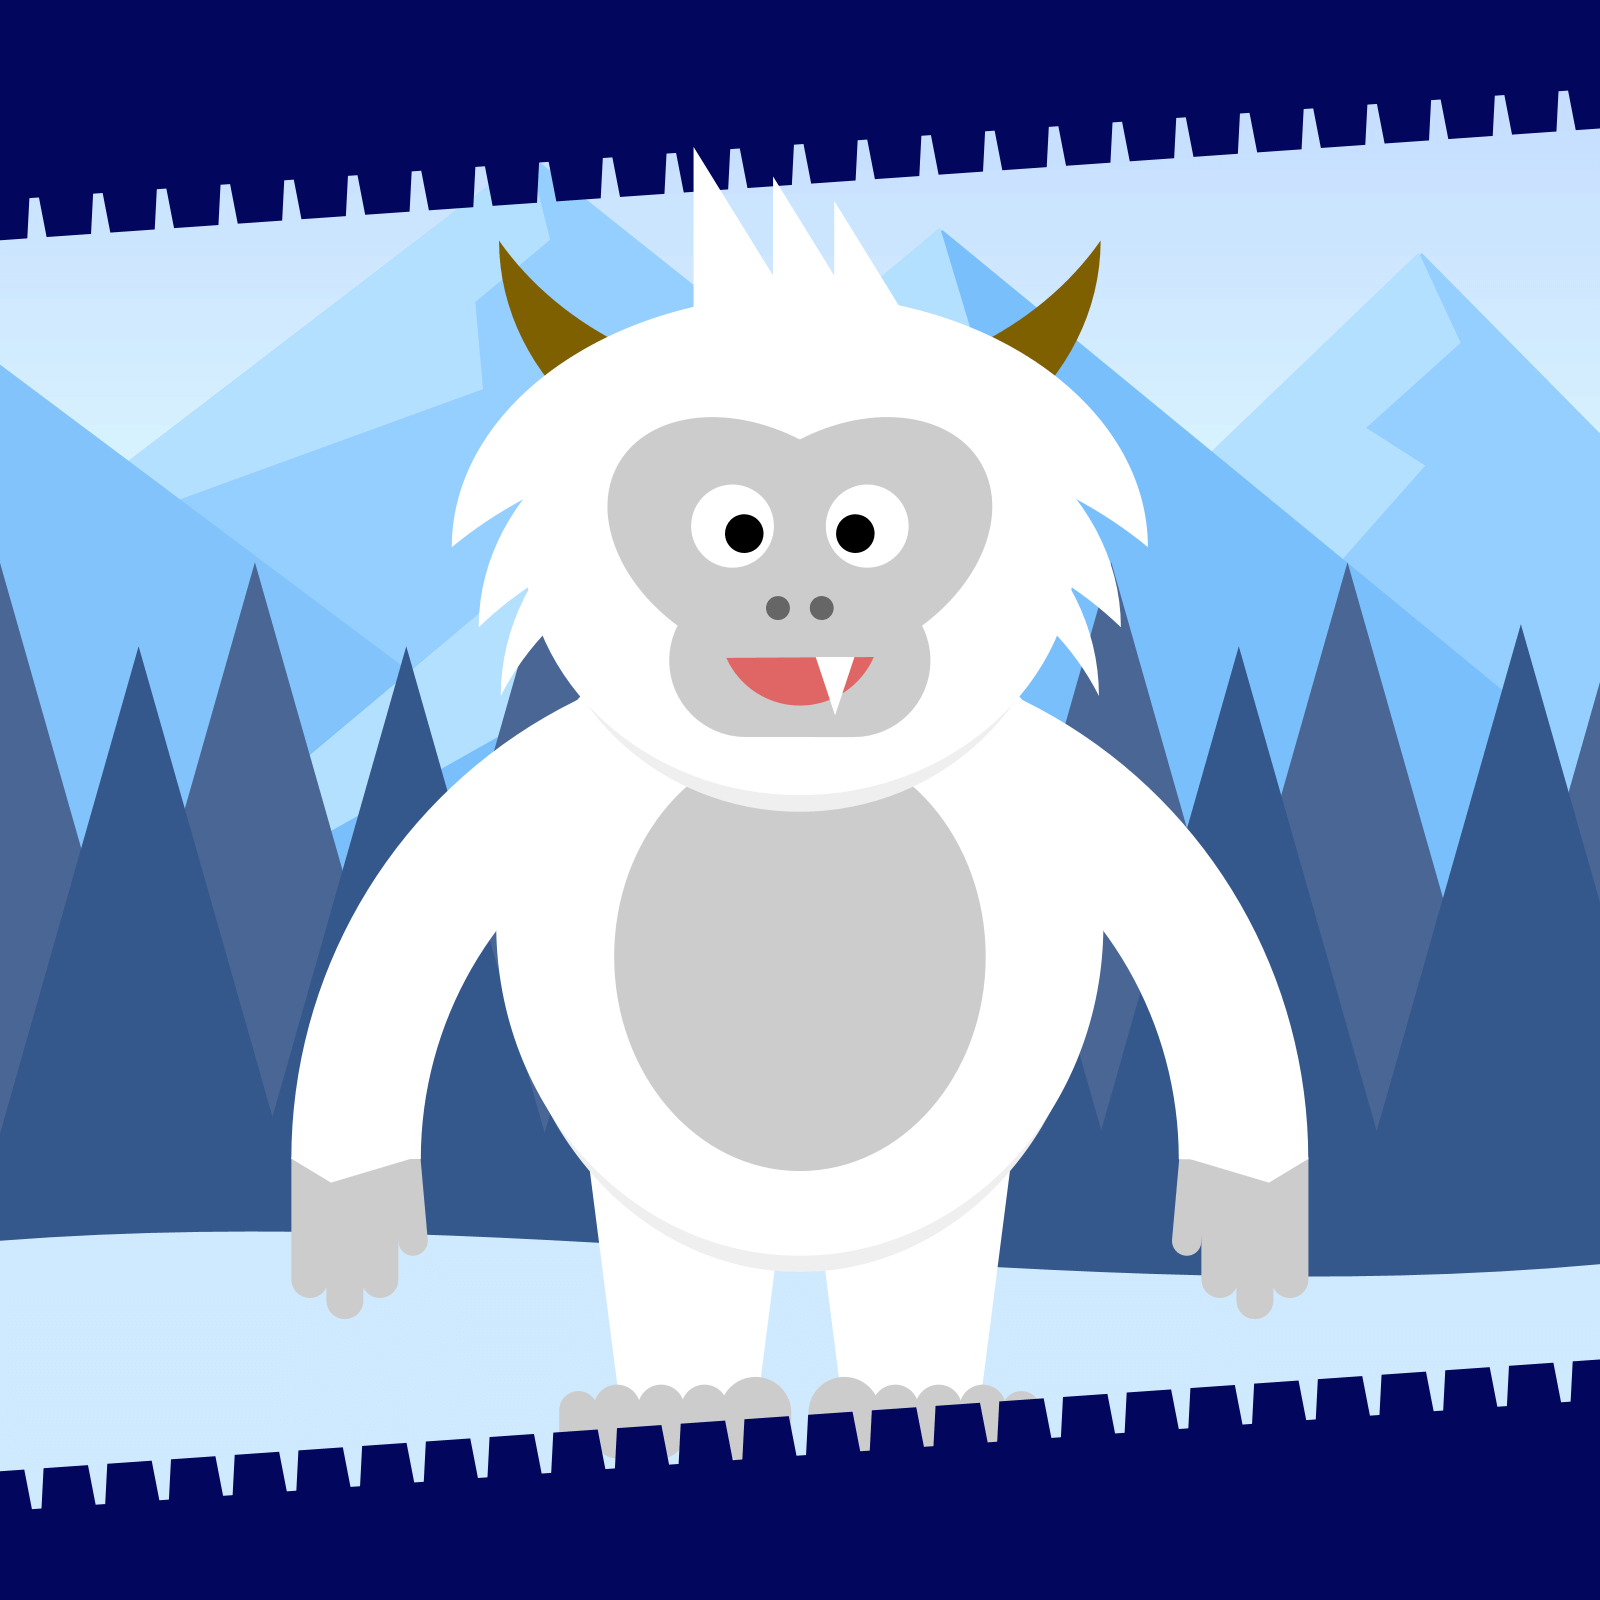 Drawing of a smiling yeti creature